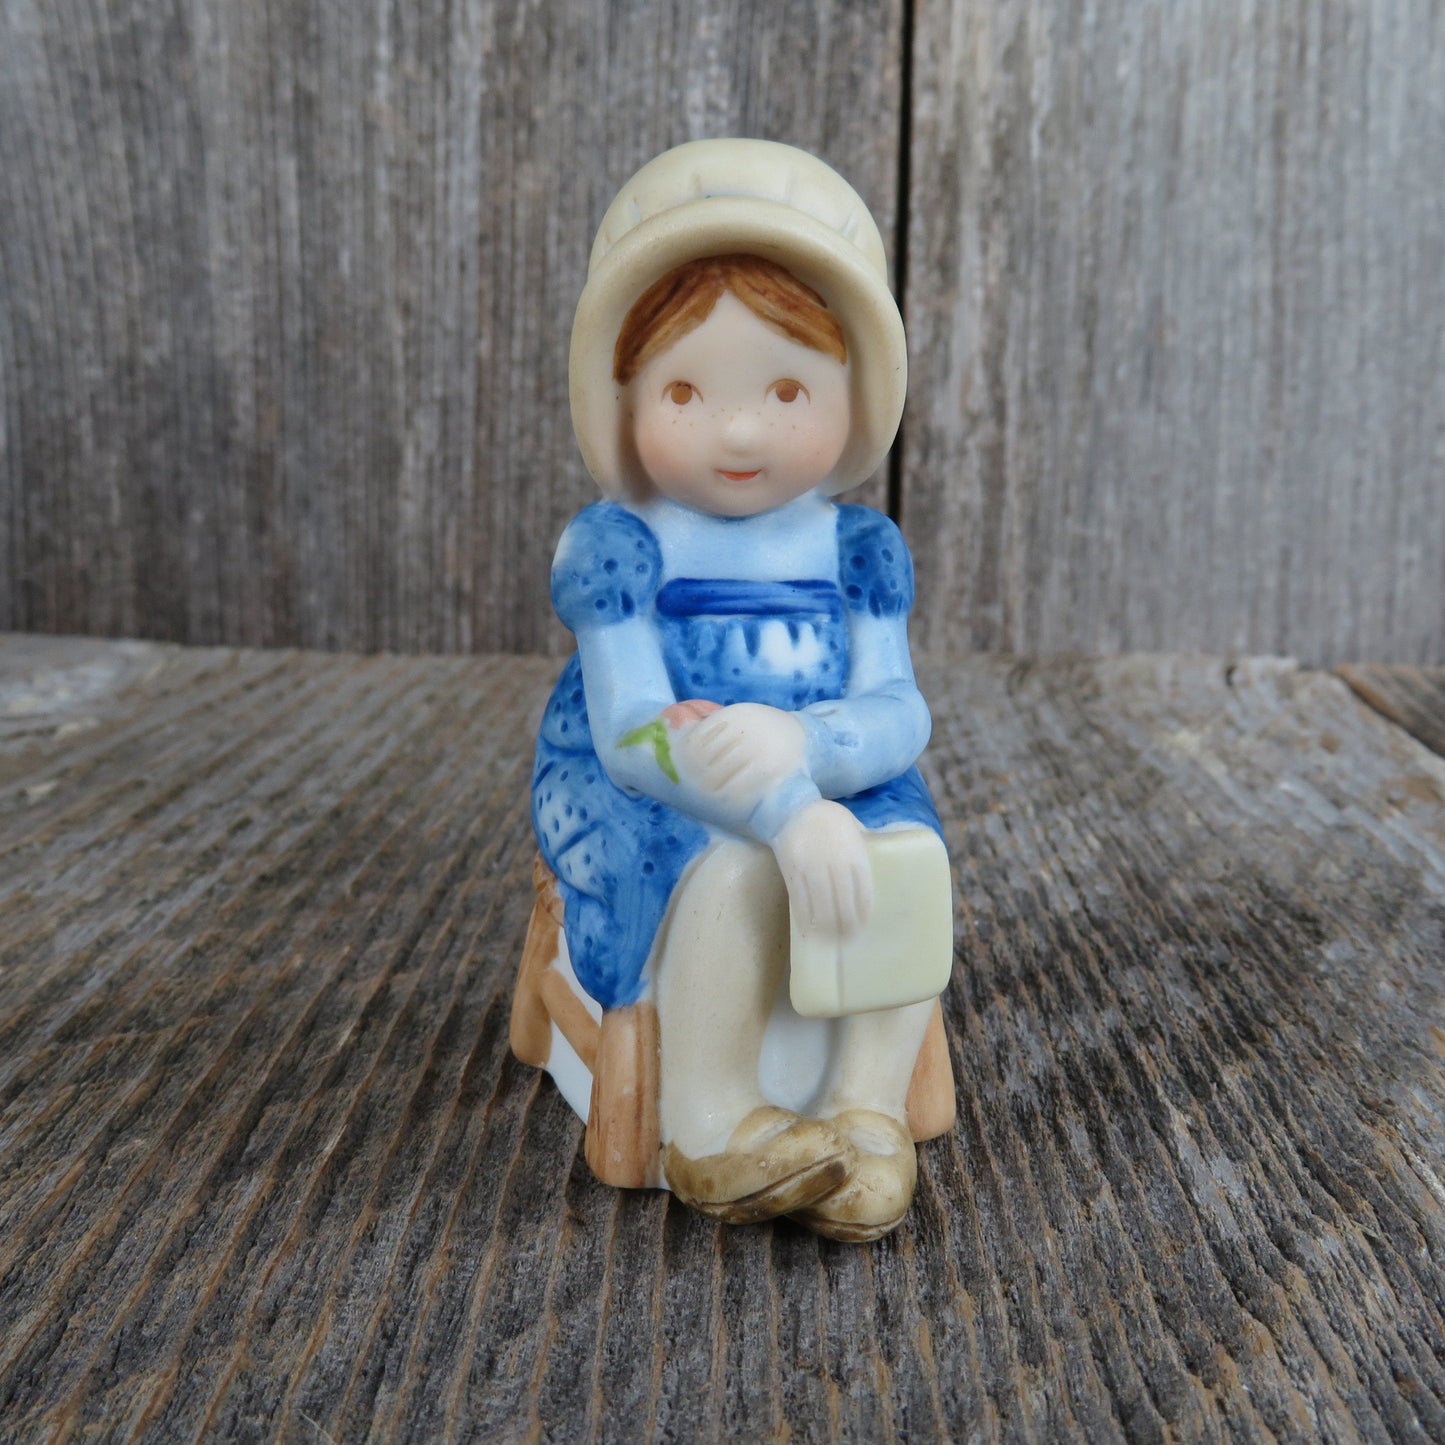 Vintage Holly Hobbie In Blue Dress Figurine Sitting on a Stool Wearing a Bonnet Book Bisque Ceramic